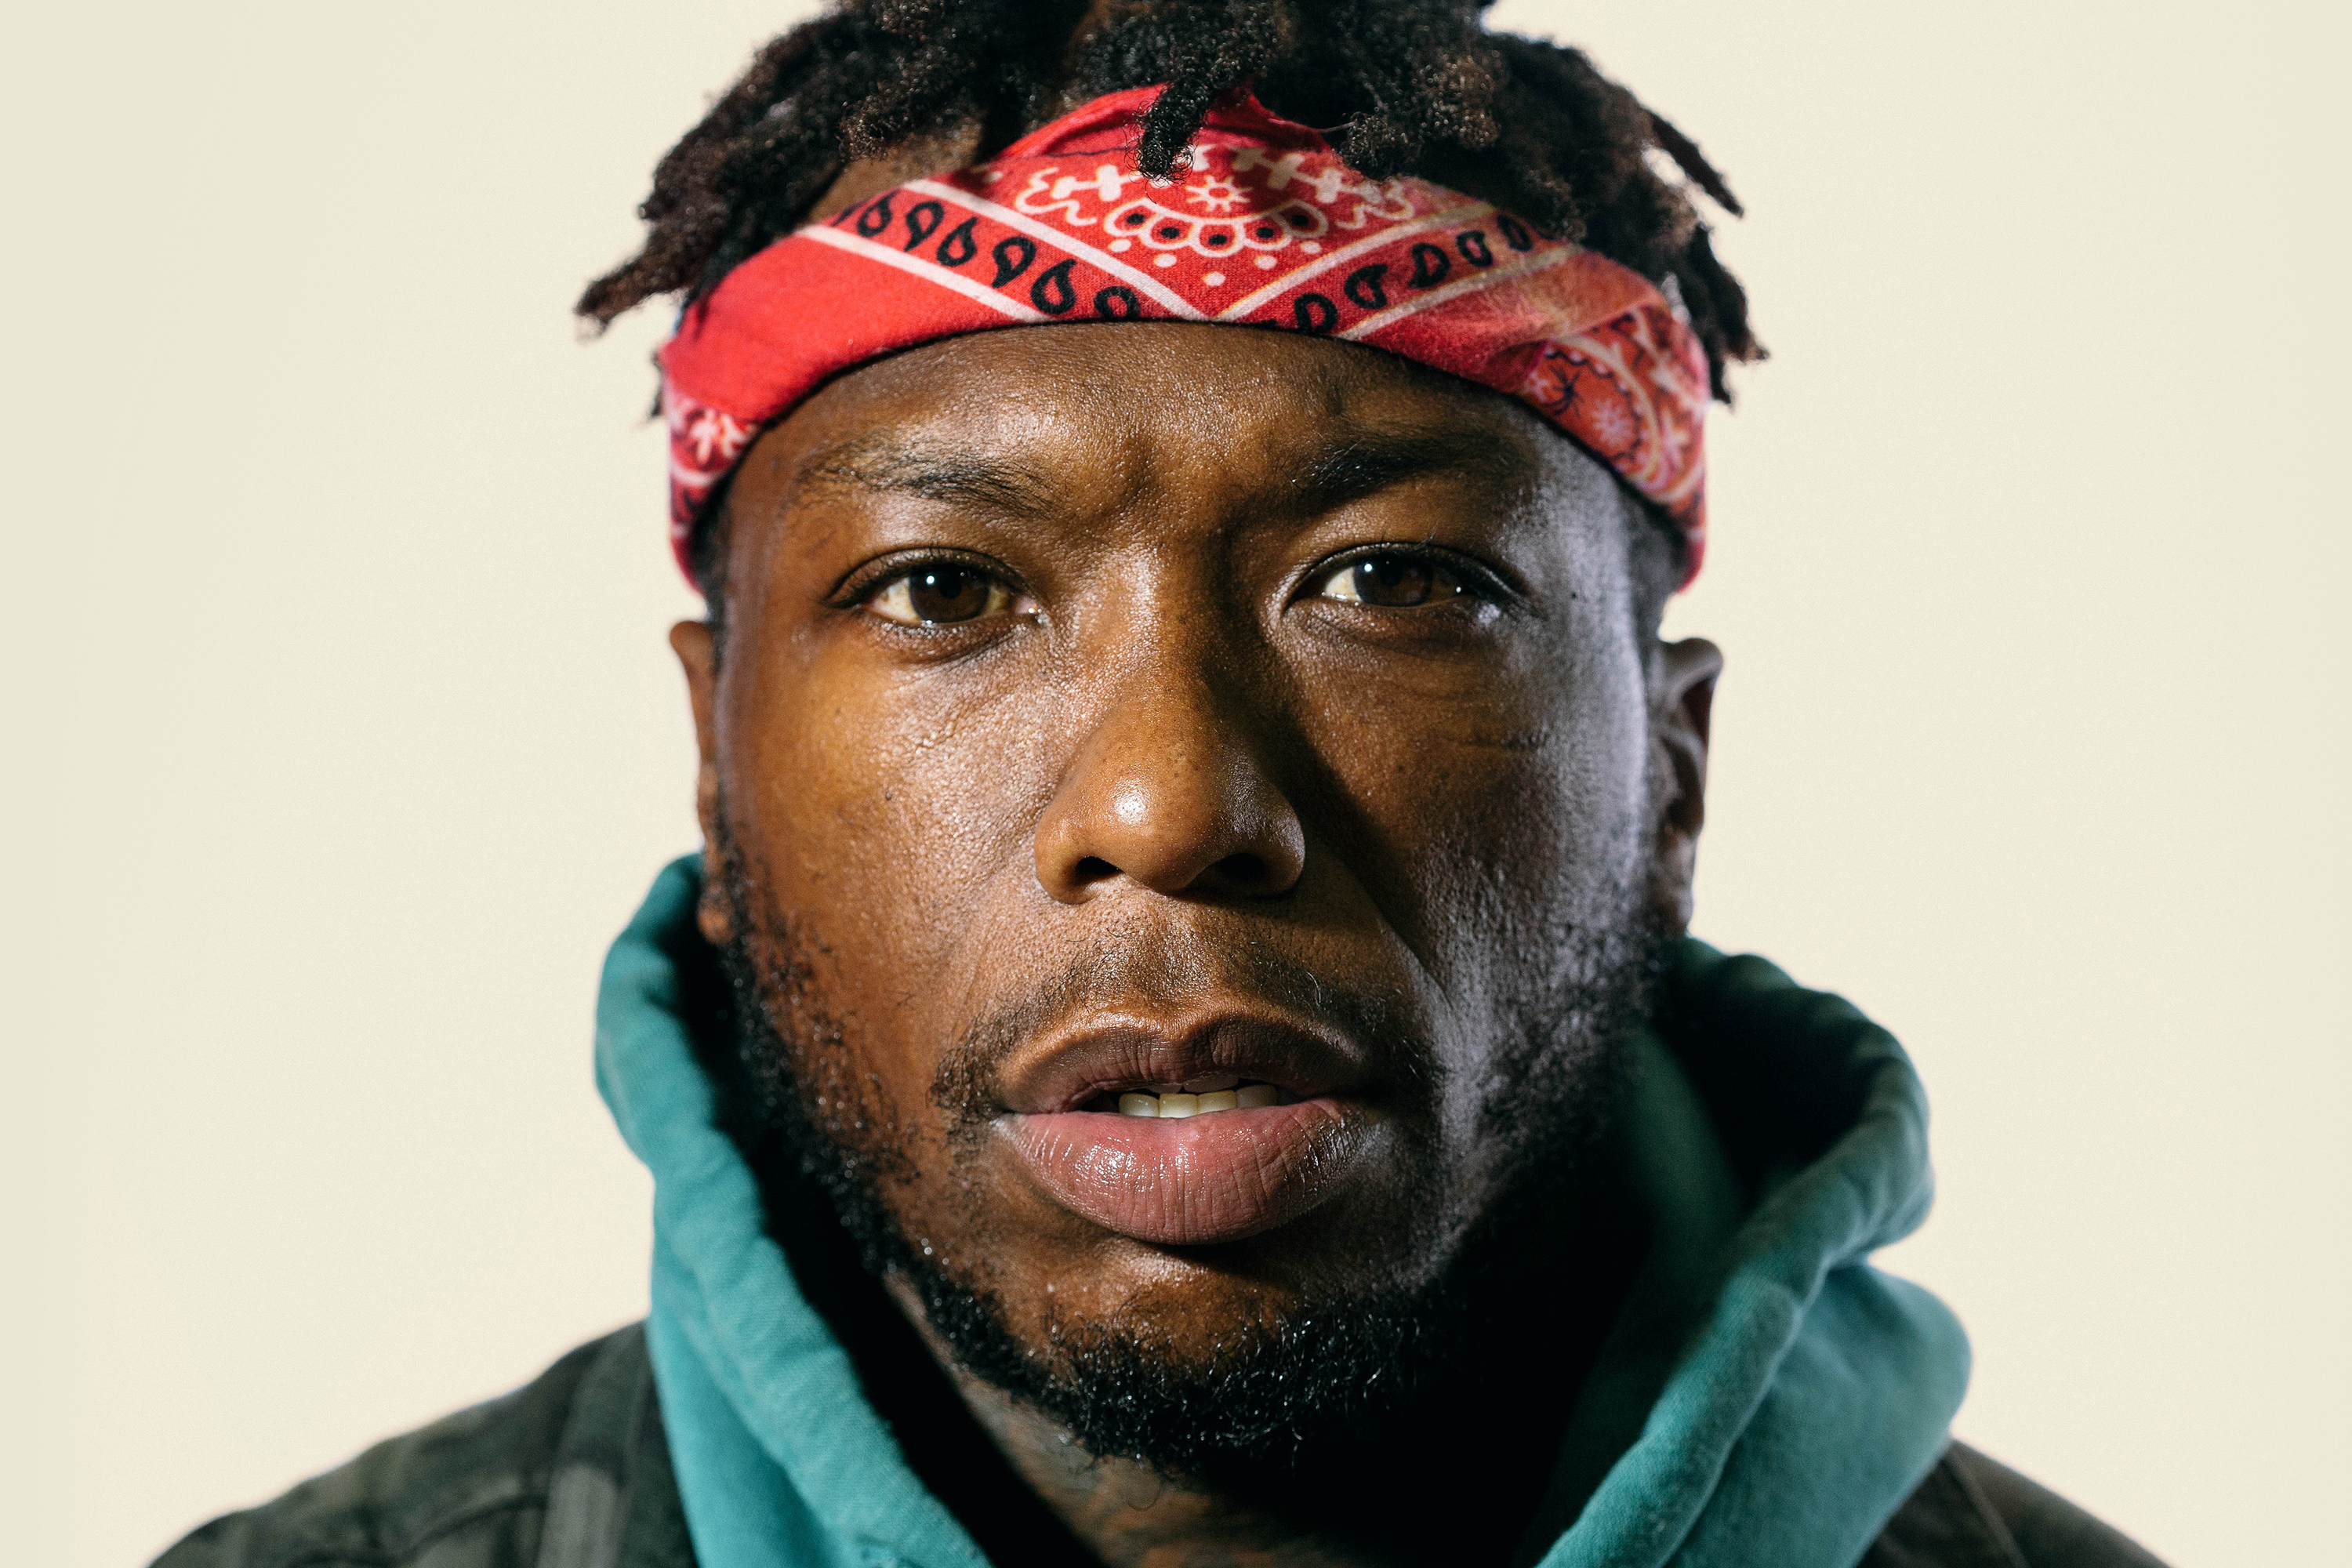 Exclusive: Nate Robinson on the past, present, future of the New York Knicks